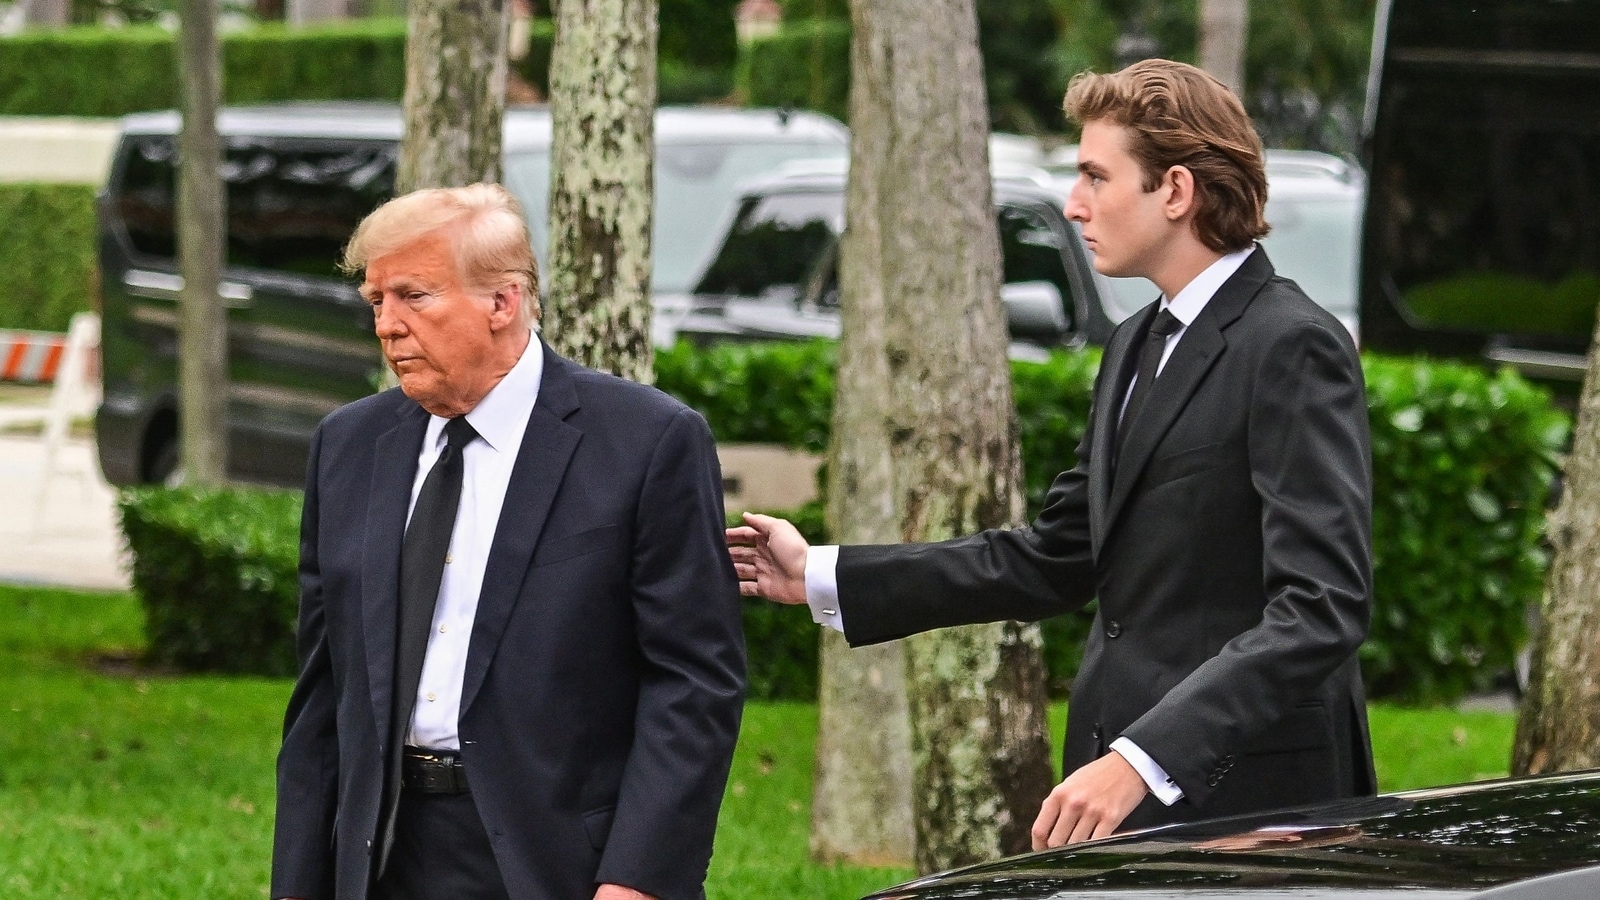 Donald Trump reveals his youngest son Barron Trump's plans after graduation, and it's not what many speculated